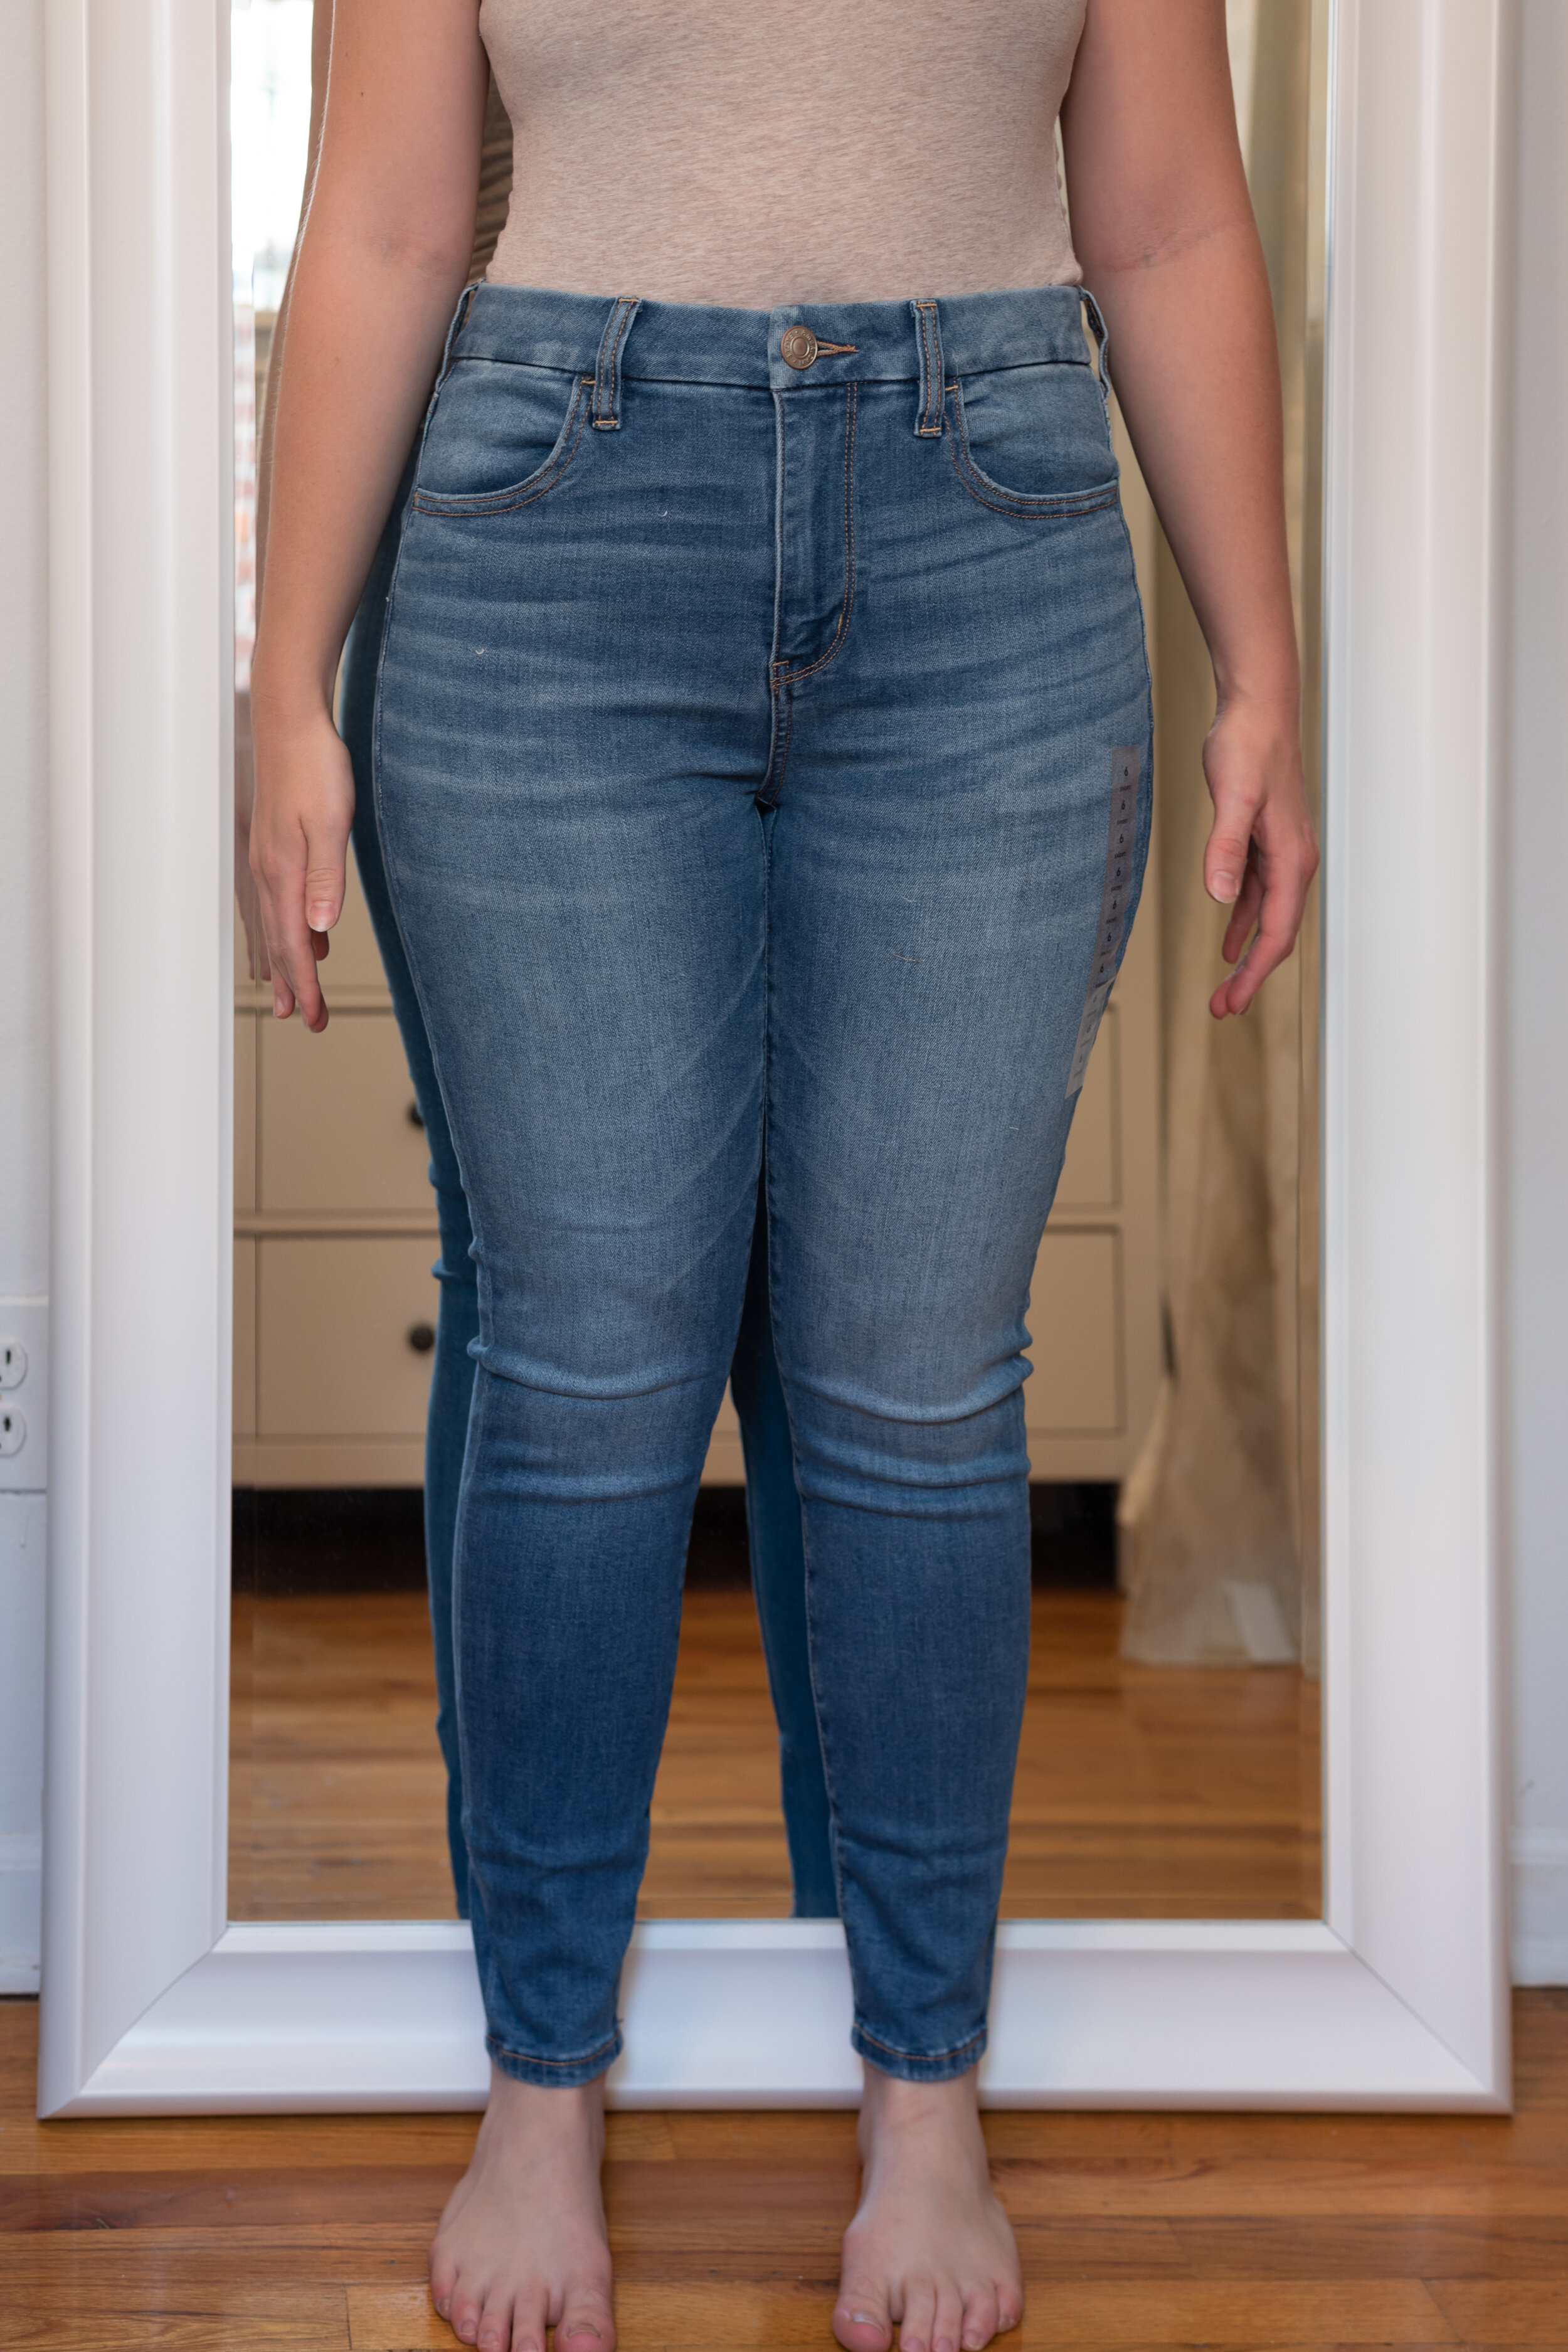 levi's 311 shaping skinny jeans review